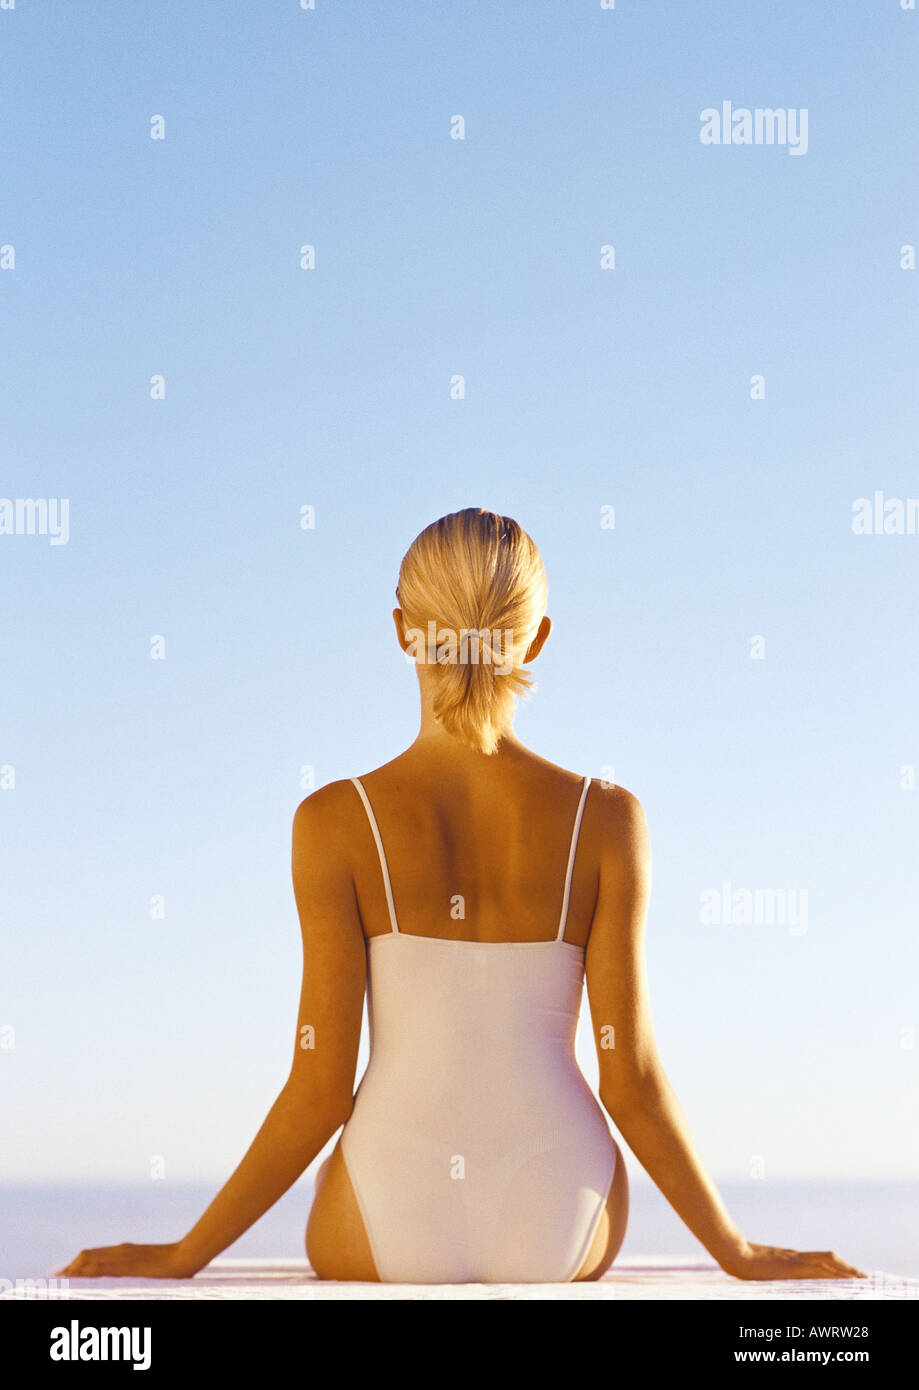 Woman in one-piece bathing suit, hands out to the side, waist up, rear view, blue sky in background Stock Photo